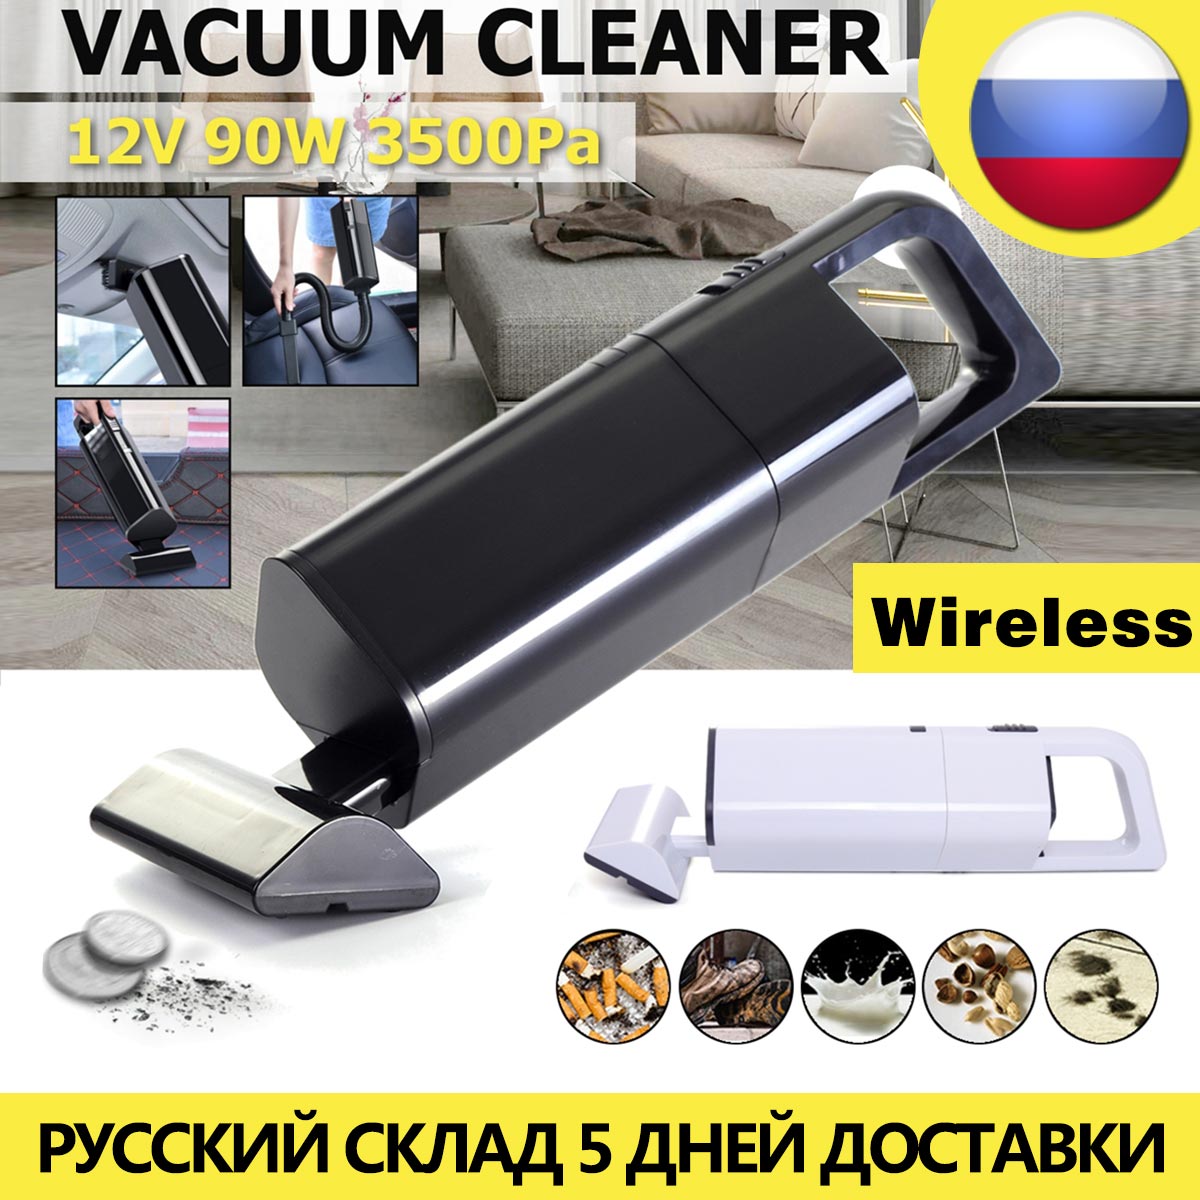 Car Vacuum Cleaner 12V 90w 3500pa Cordless High Suction Wireless Usb Portable Handheld Cleaner Wet and Dry Dual Use Rechargeable